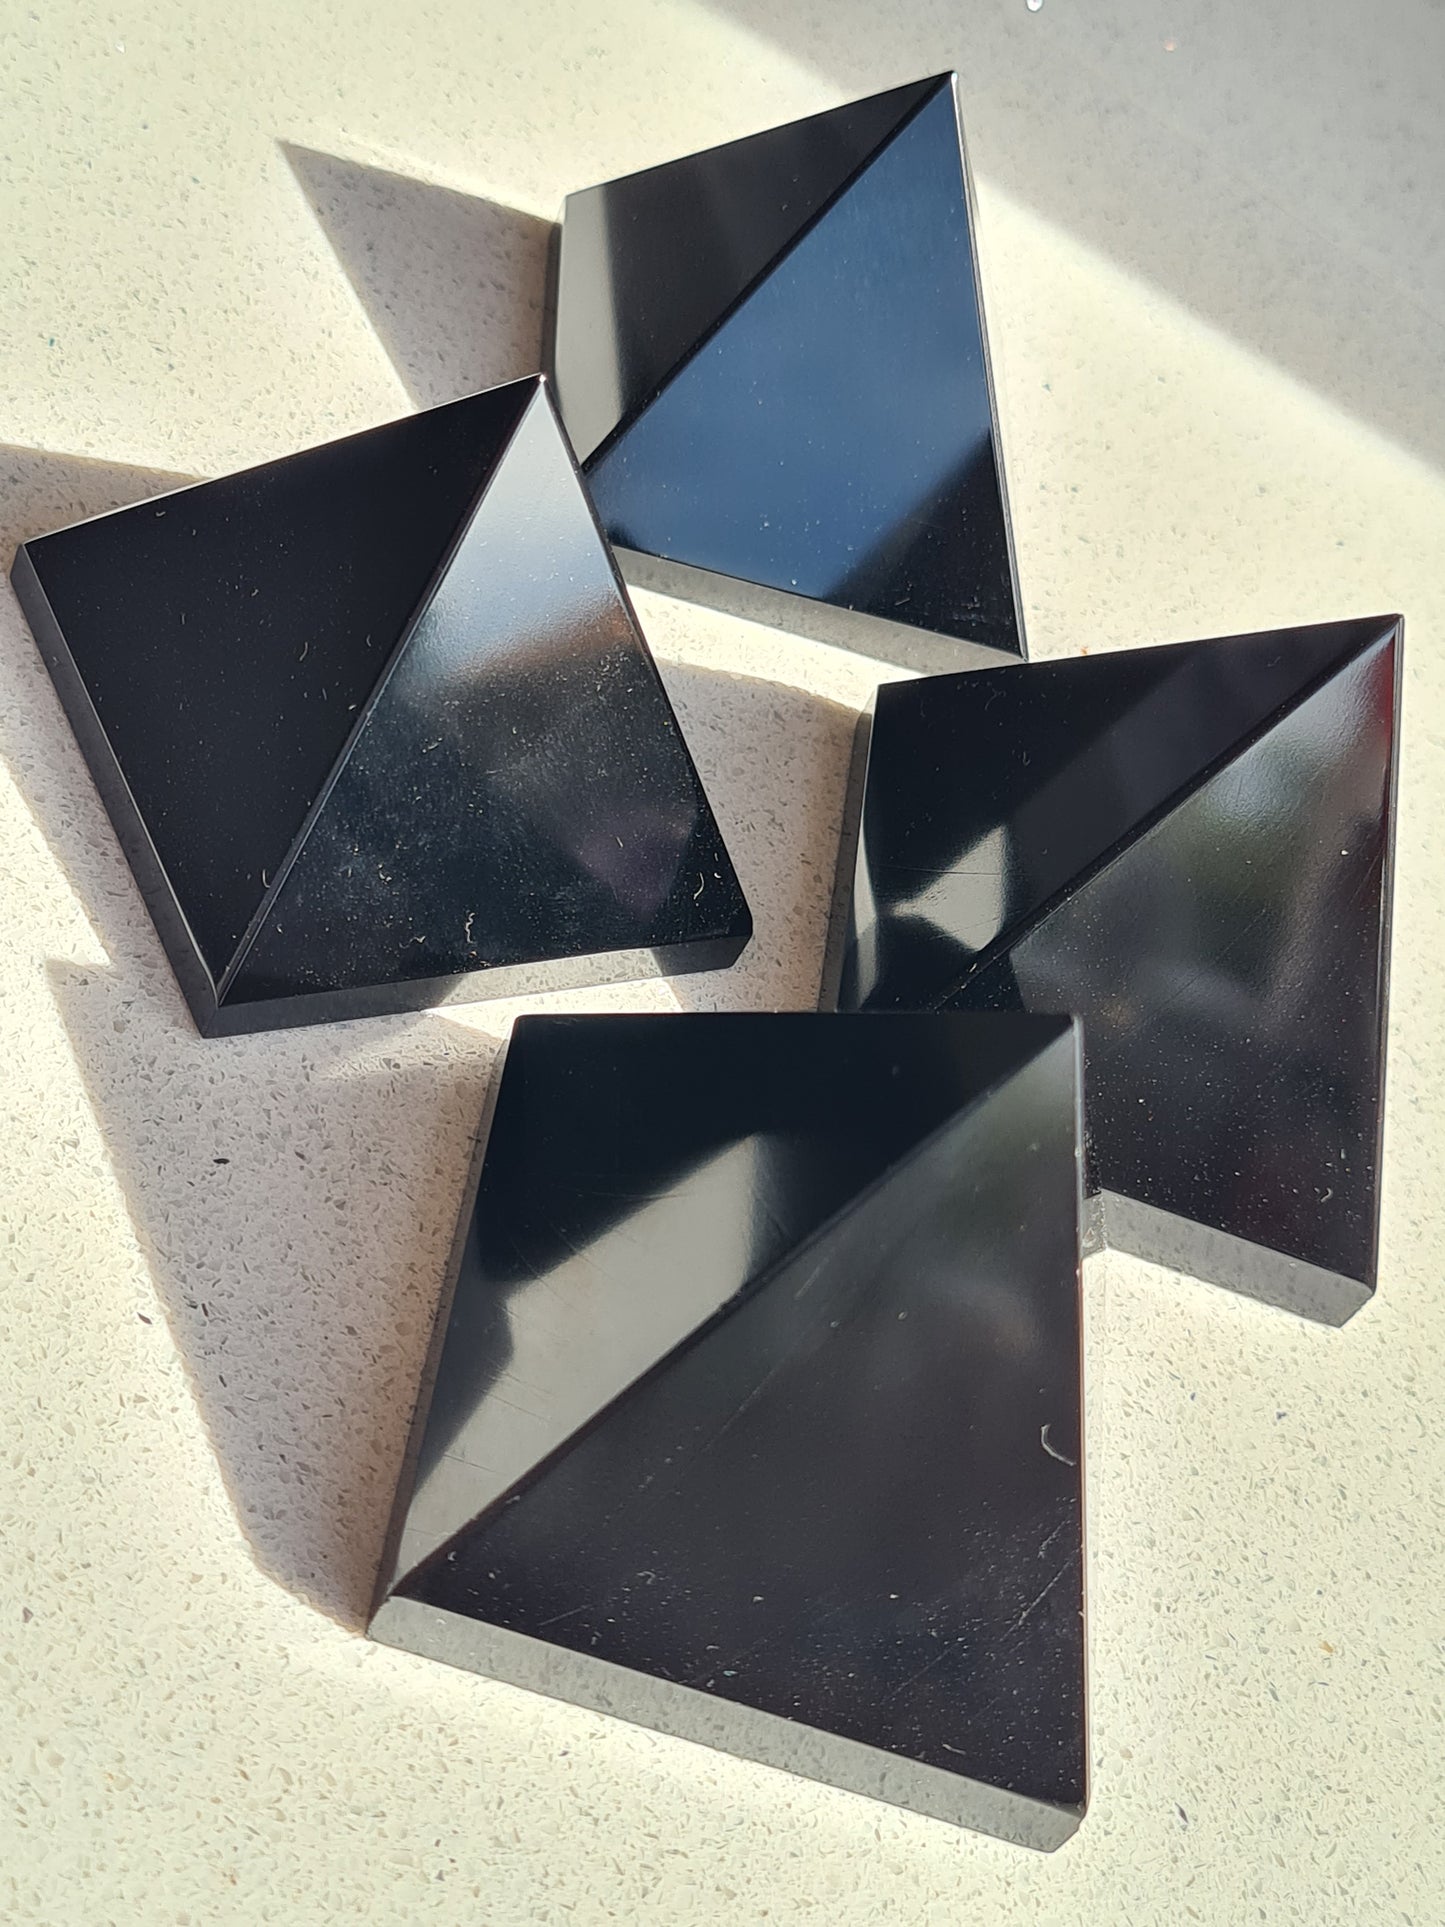 Polished Black Obsidian Pyramids with vitreous lustre and bringing protection and grounding.